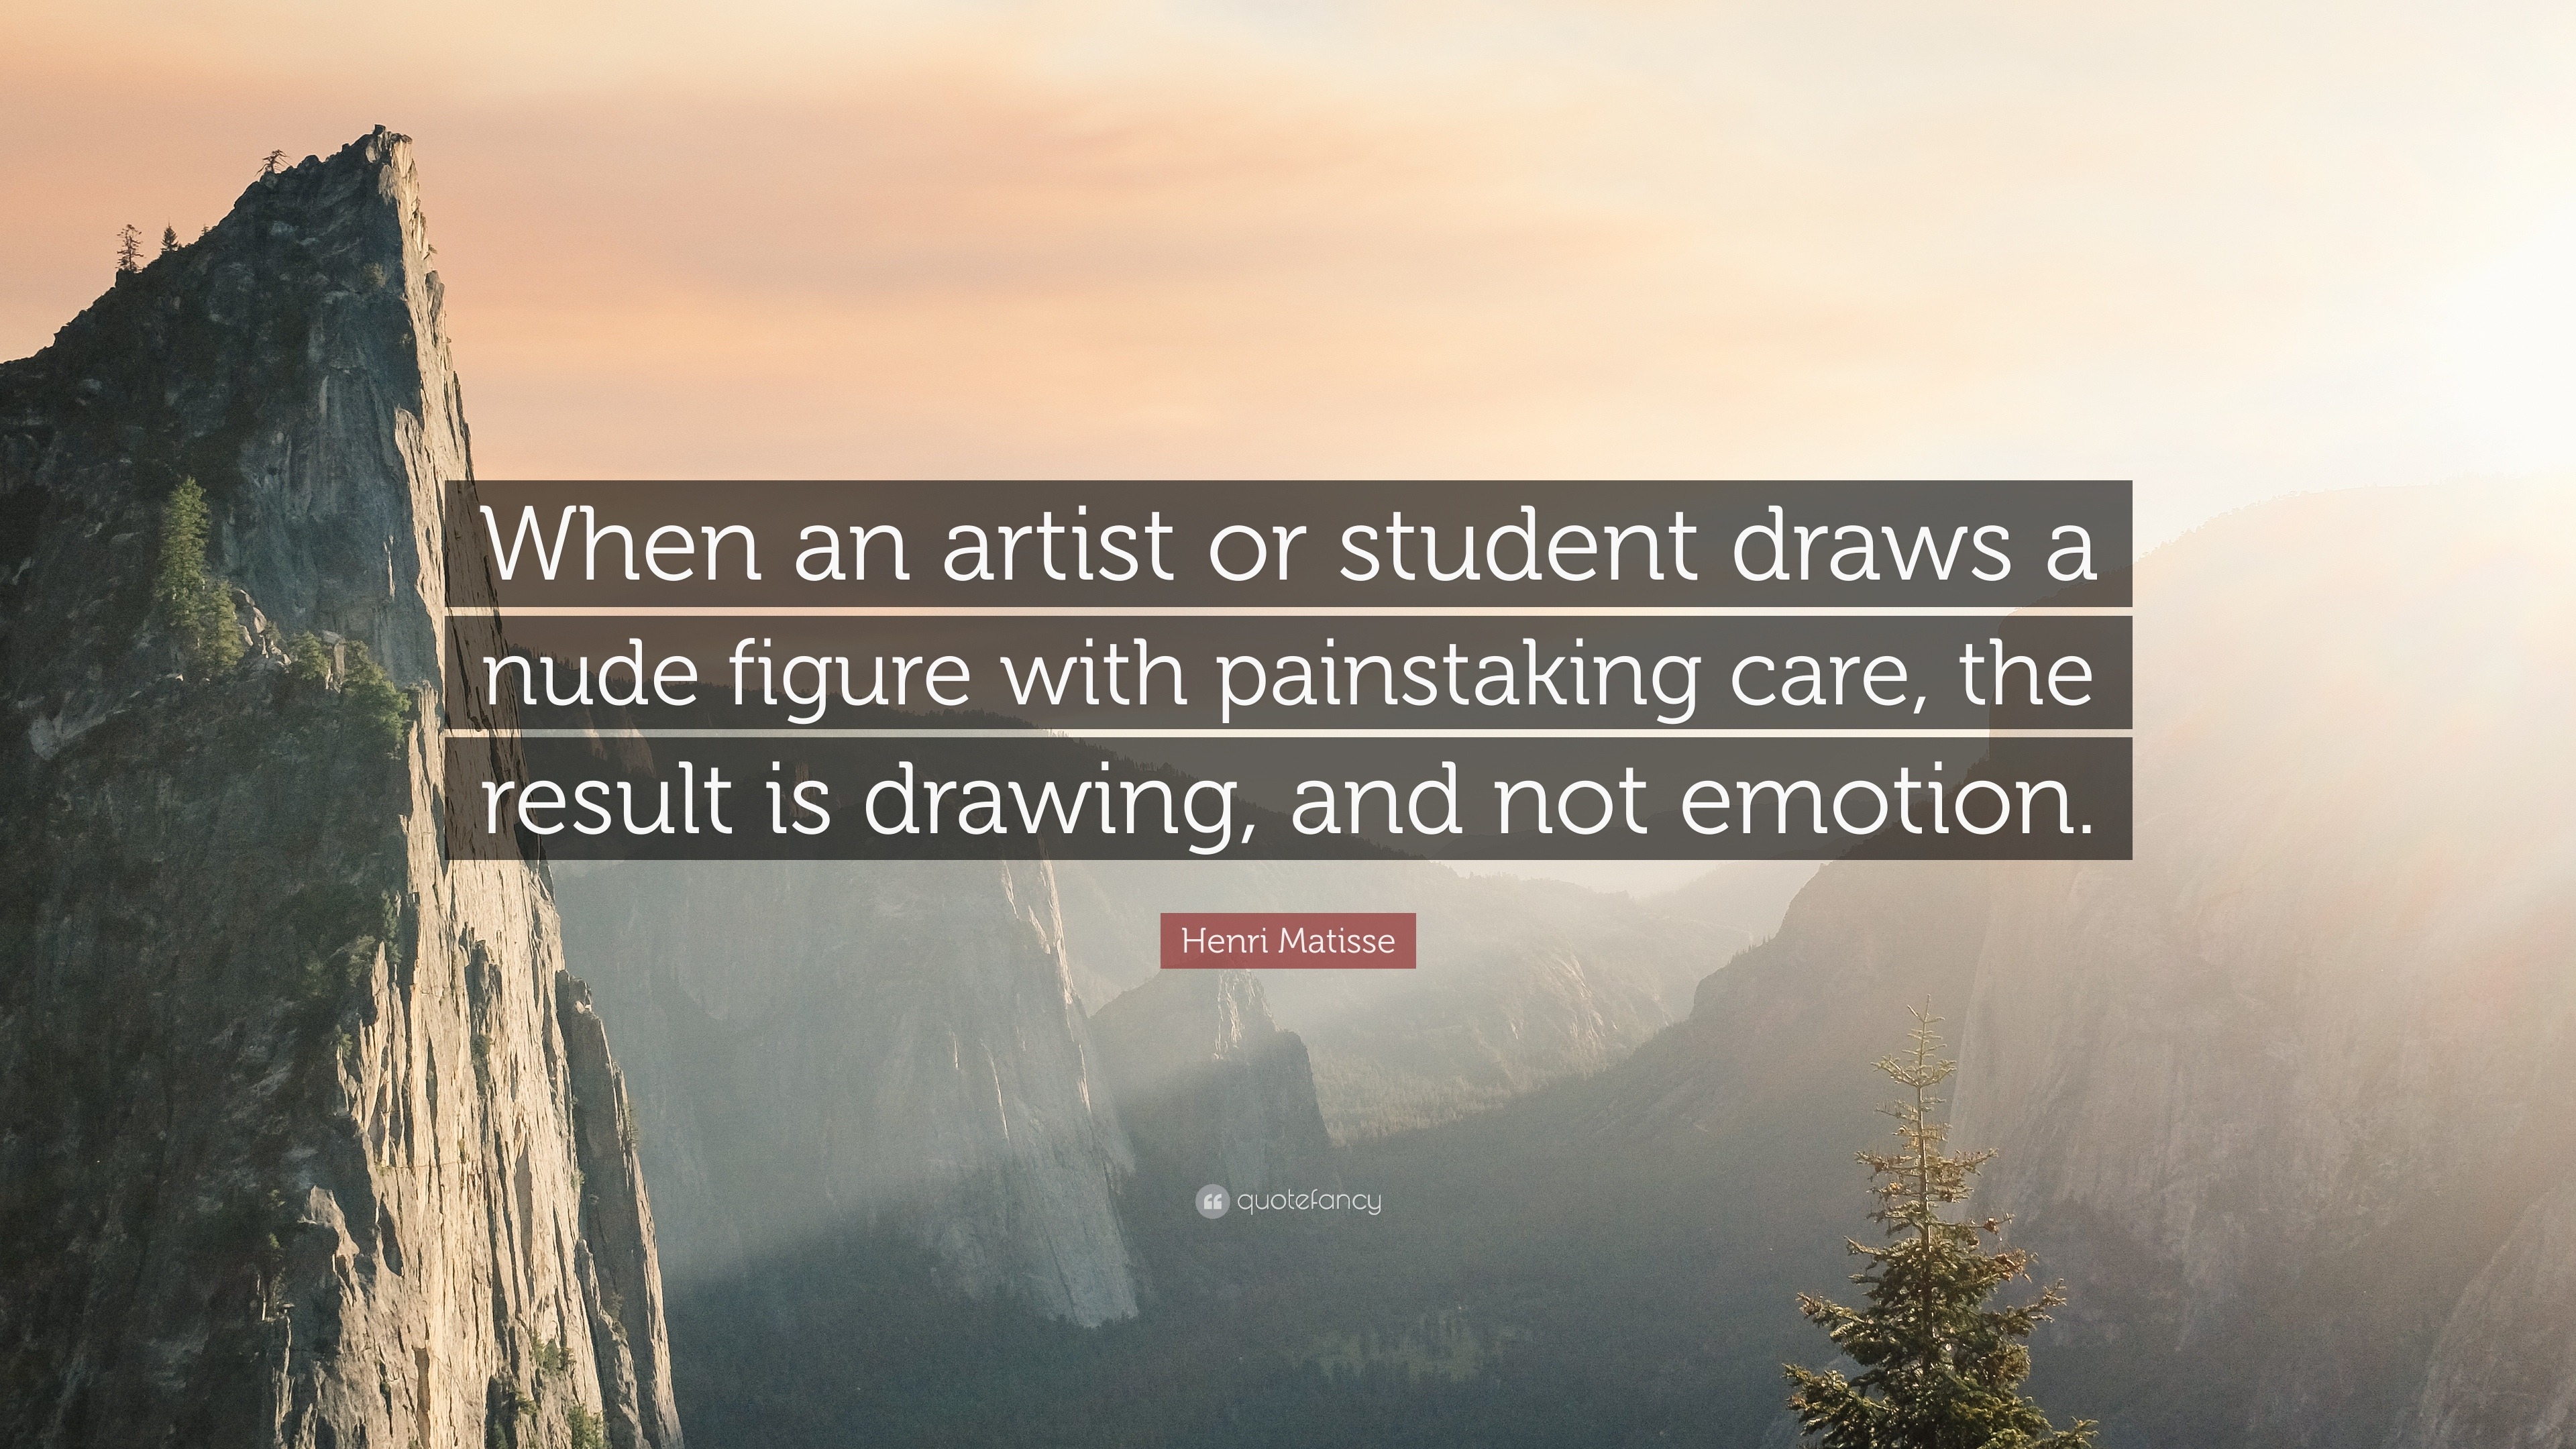 Trendy Drawing Quotes Artists Creativity 50+ Ideas | Konst